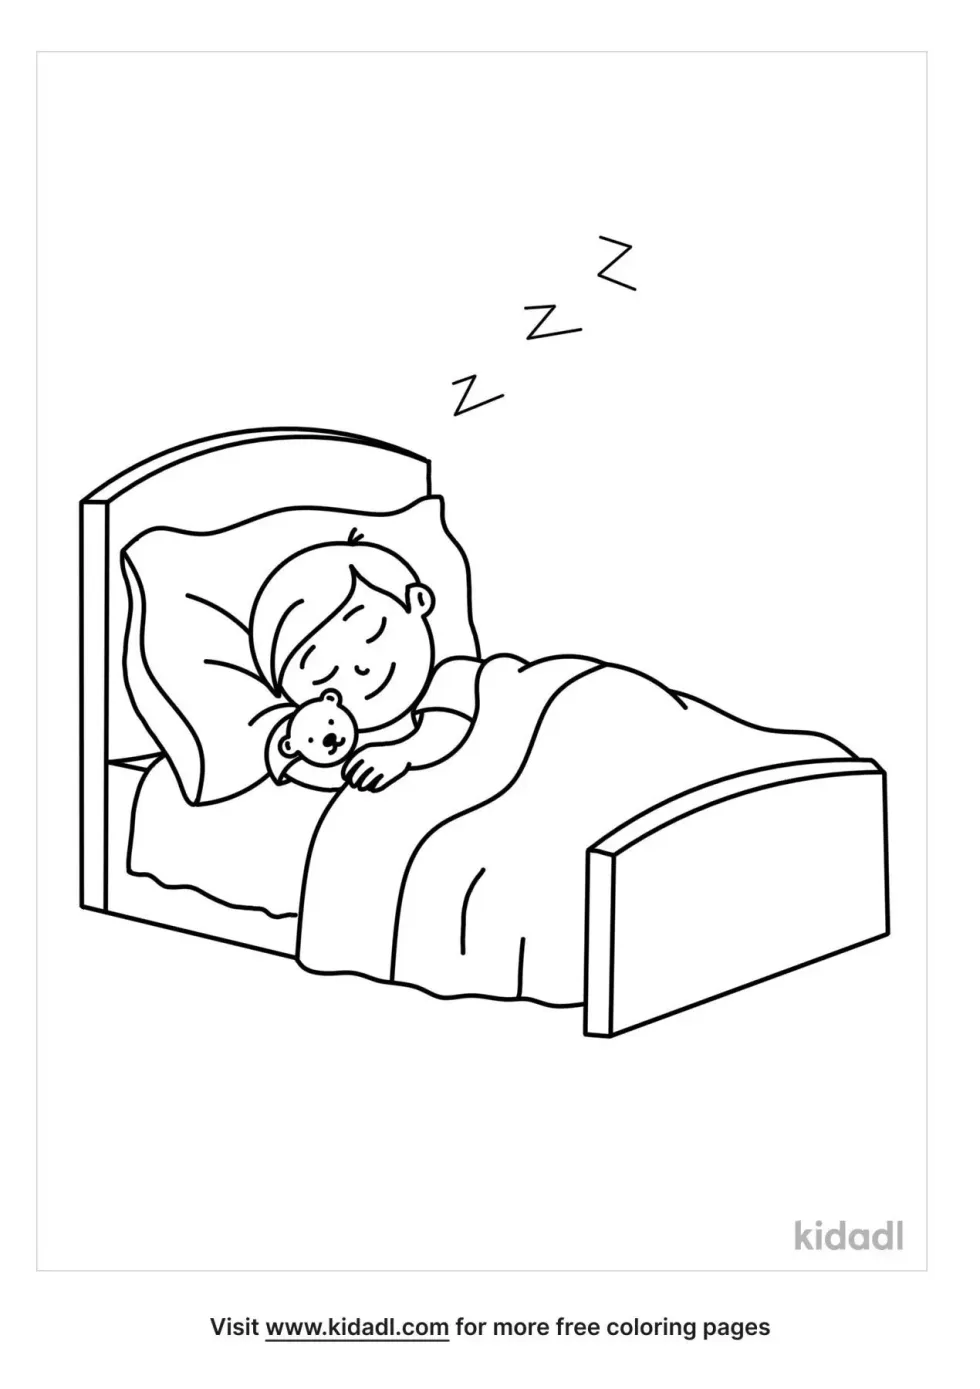 Teddy Bear And I Sleeping Coloring Page